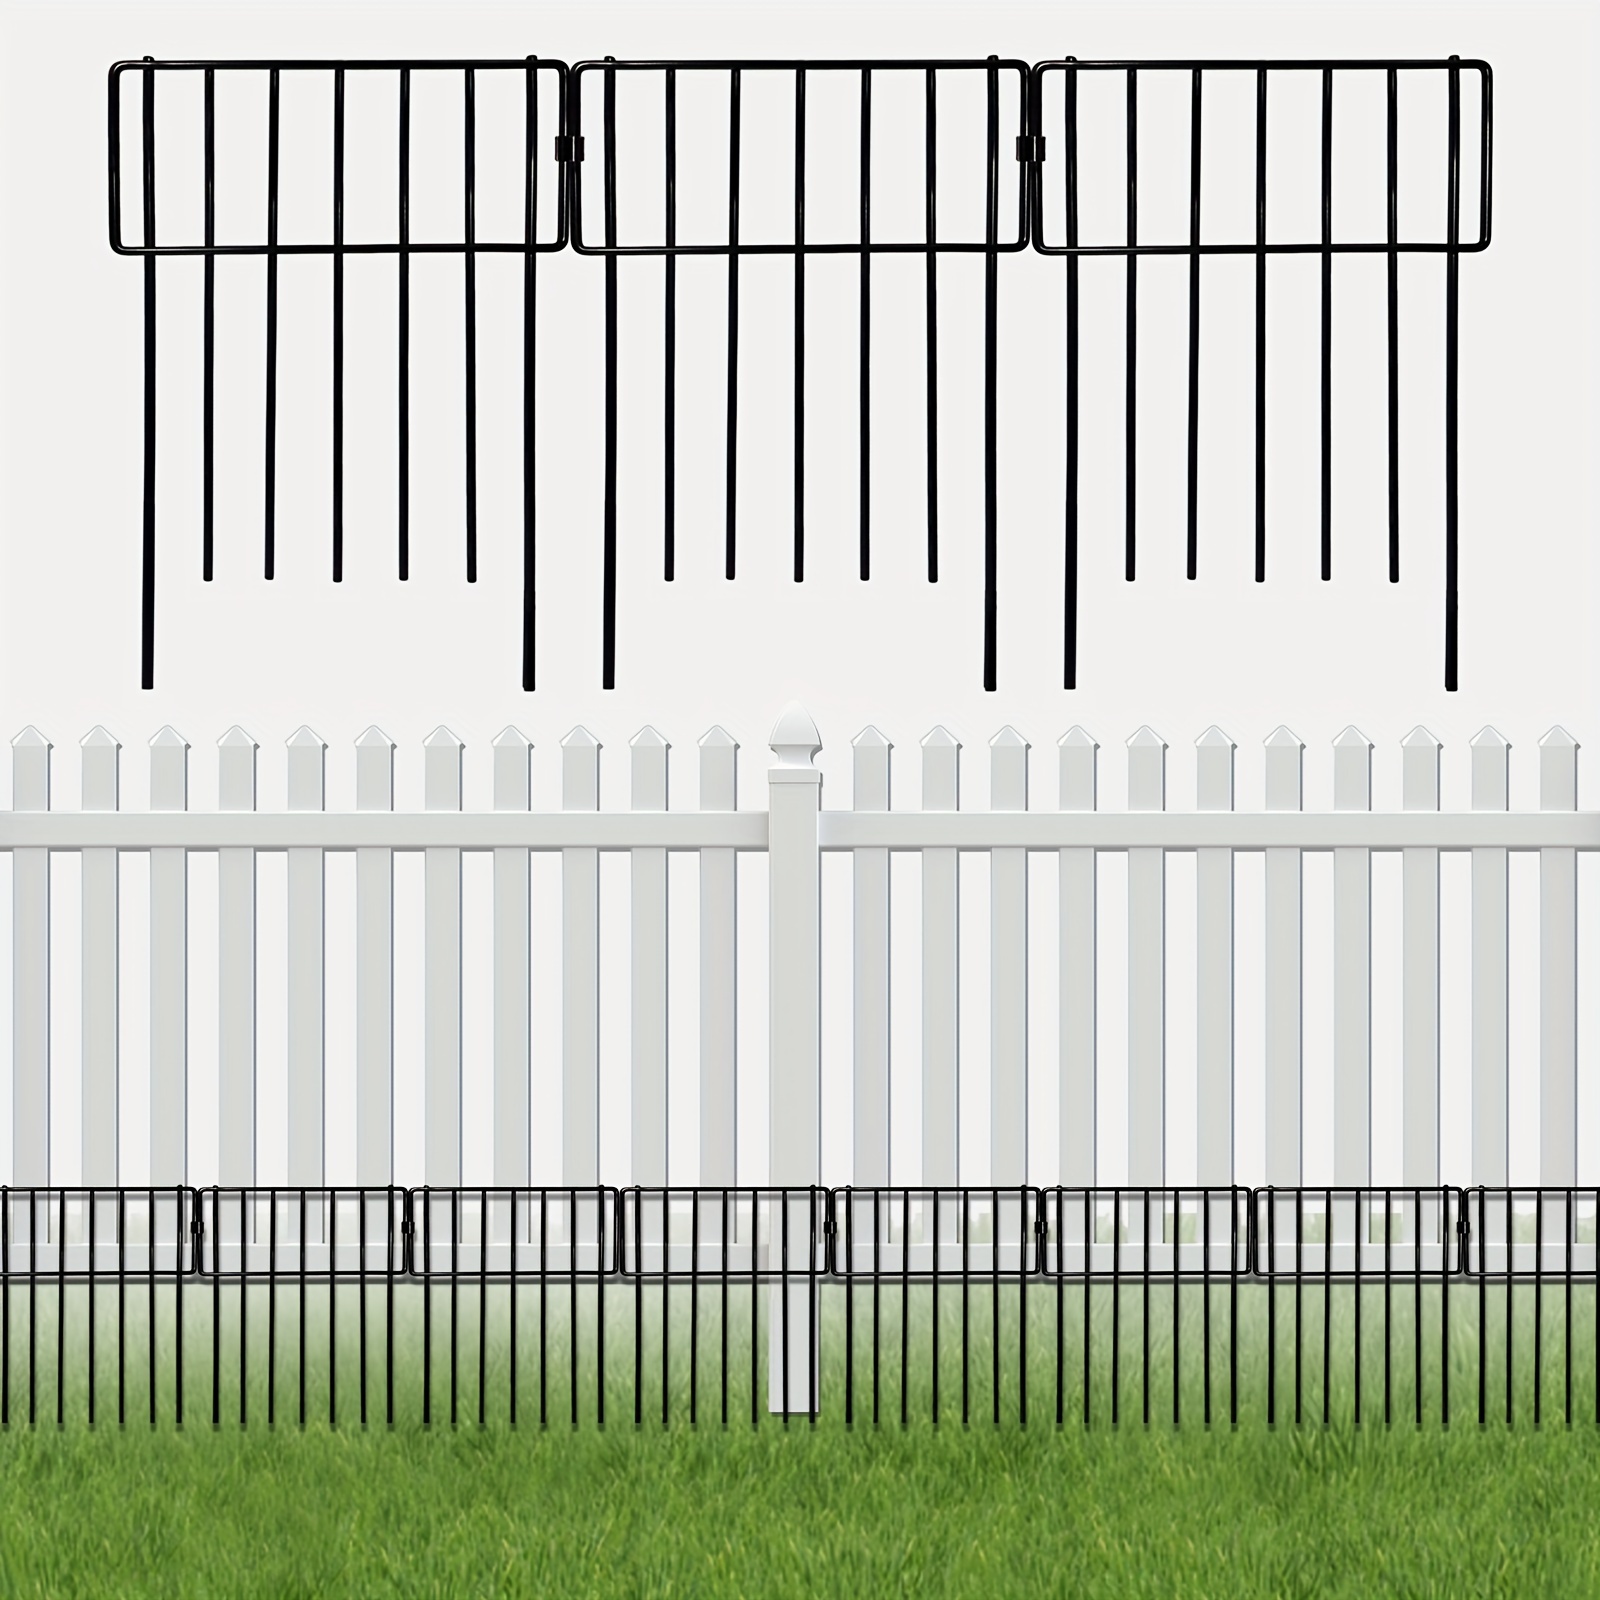 

1pc Garden Fence Animal Barrier Fence 10pack, 17inx10ft No Dig Fence For Dogs Rabbits, Rustproof Metal Wire Garden Border Decorative Fences Small Fence Panels For Yard Patio Decor